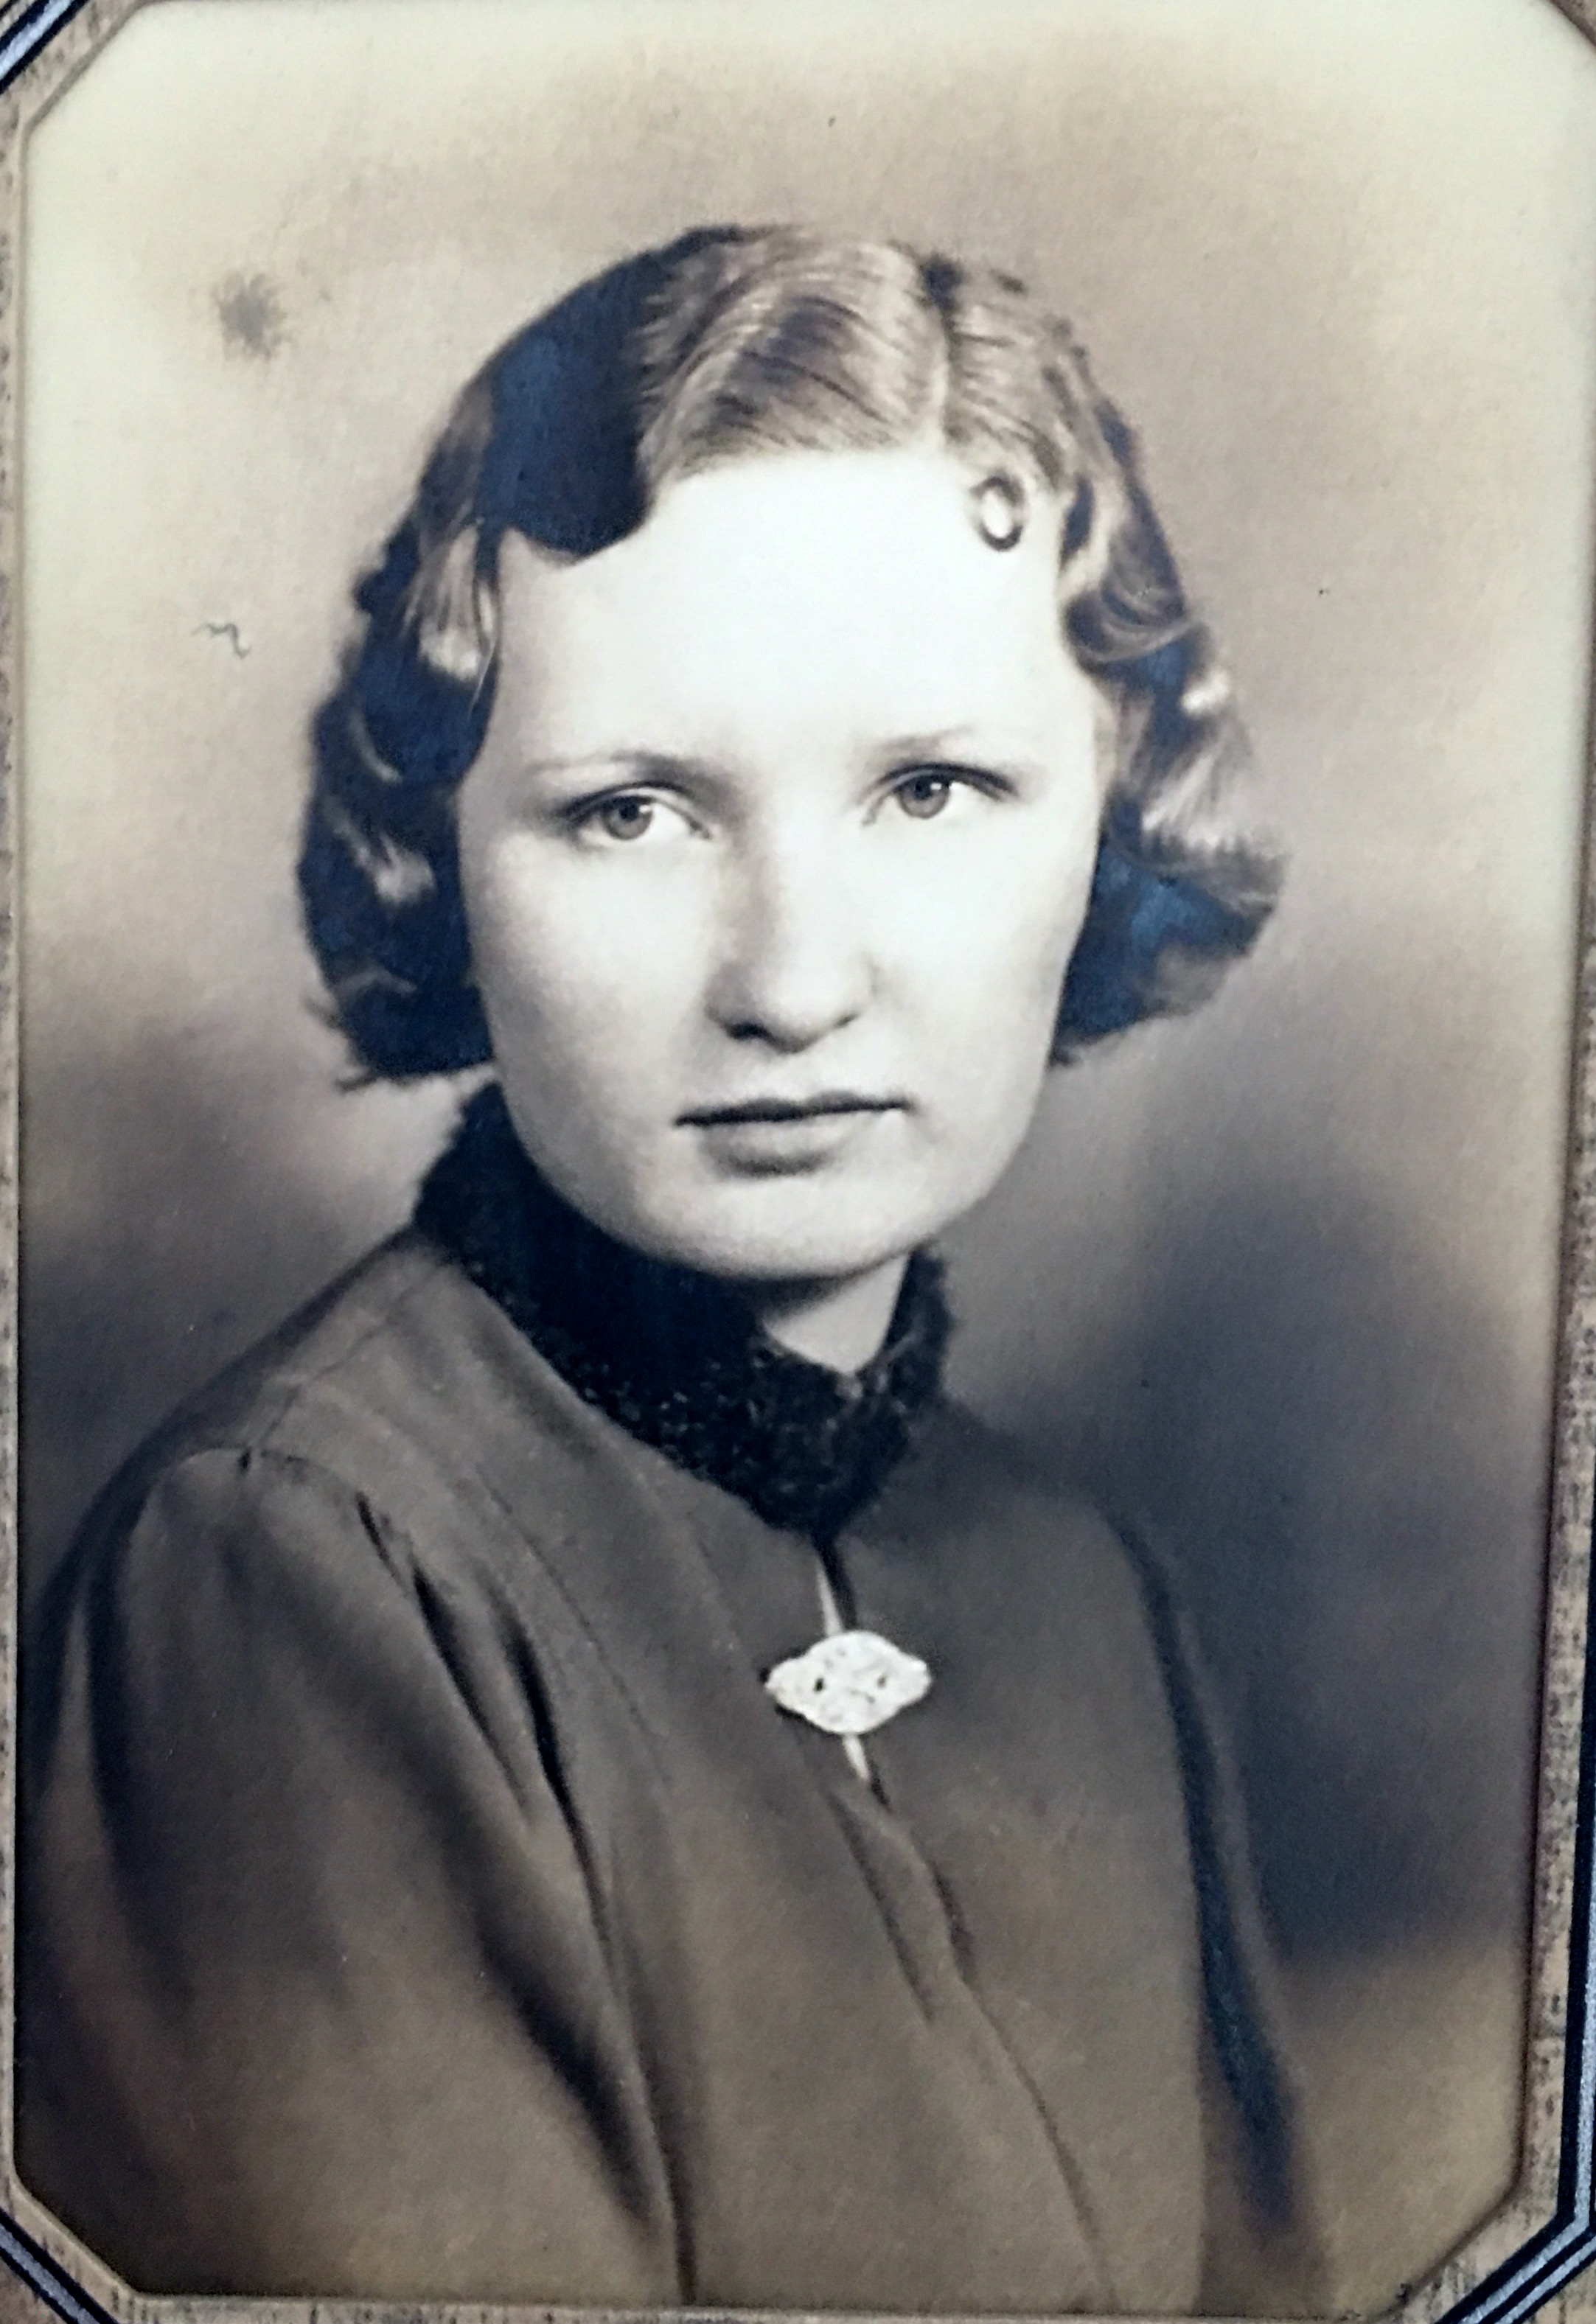 Mom Berry’s high school picture (? 1937).